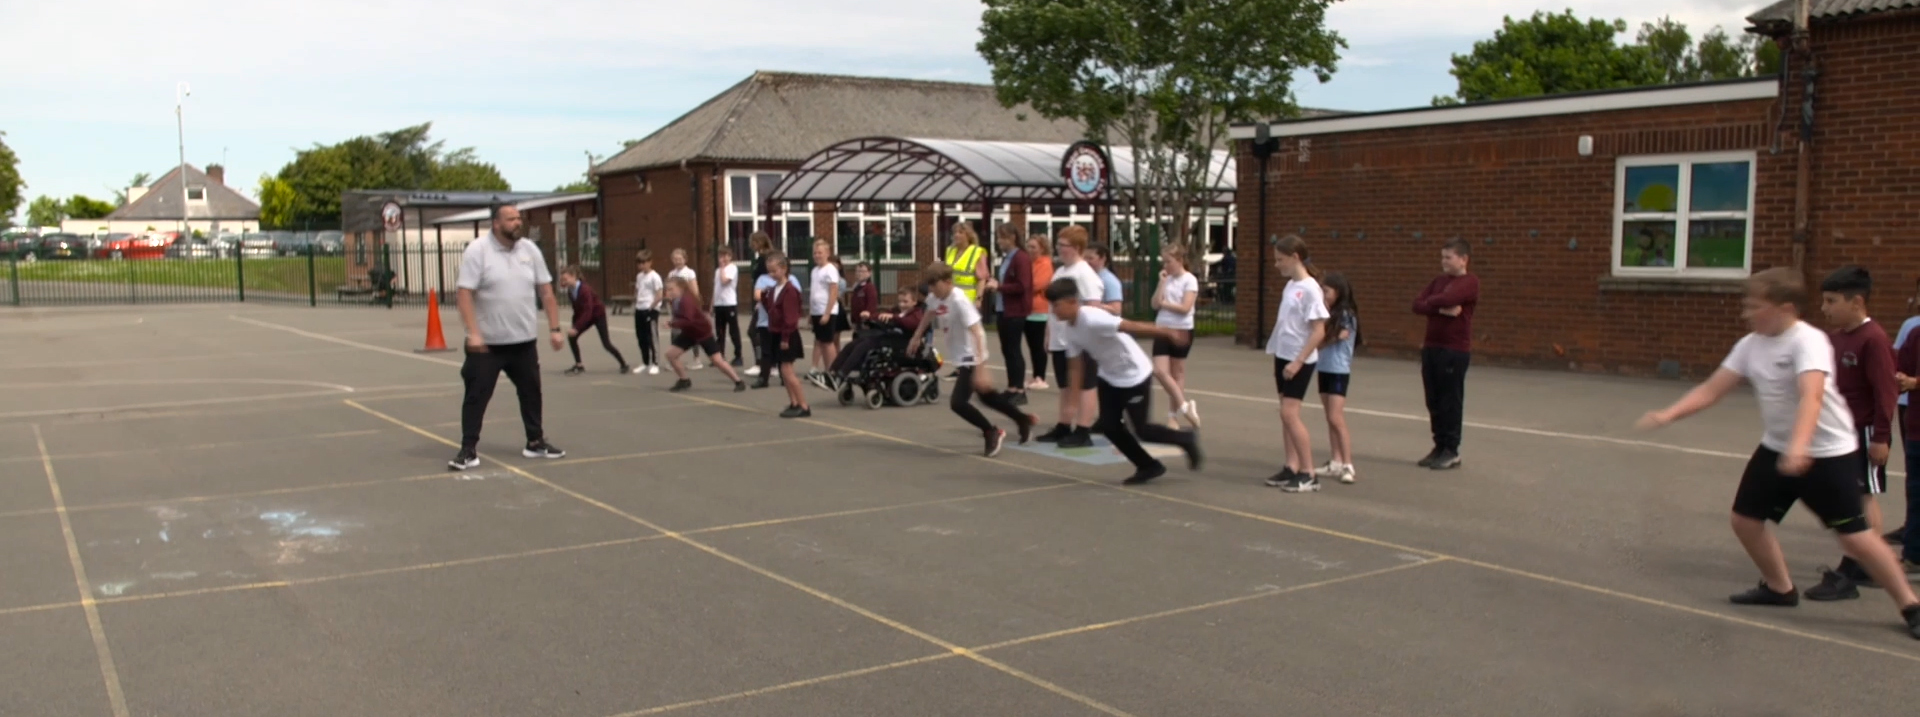 A PE session taking place at a school, inclusive of disabled and non-disabled learners